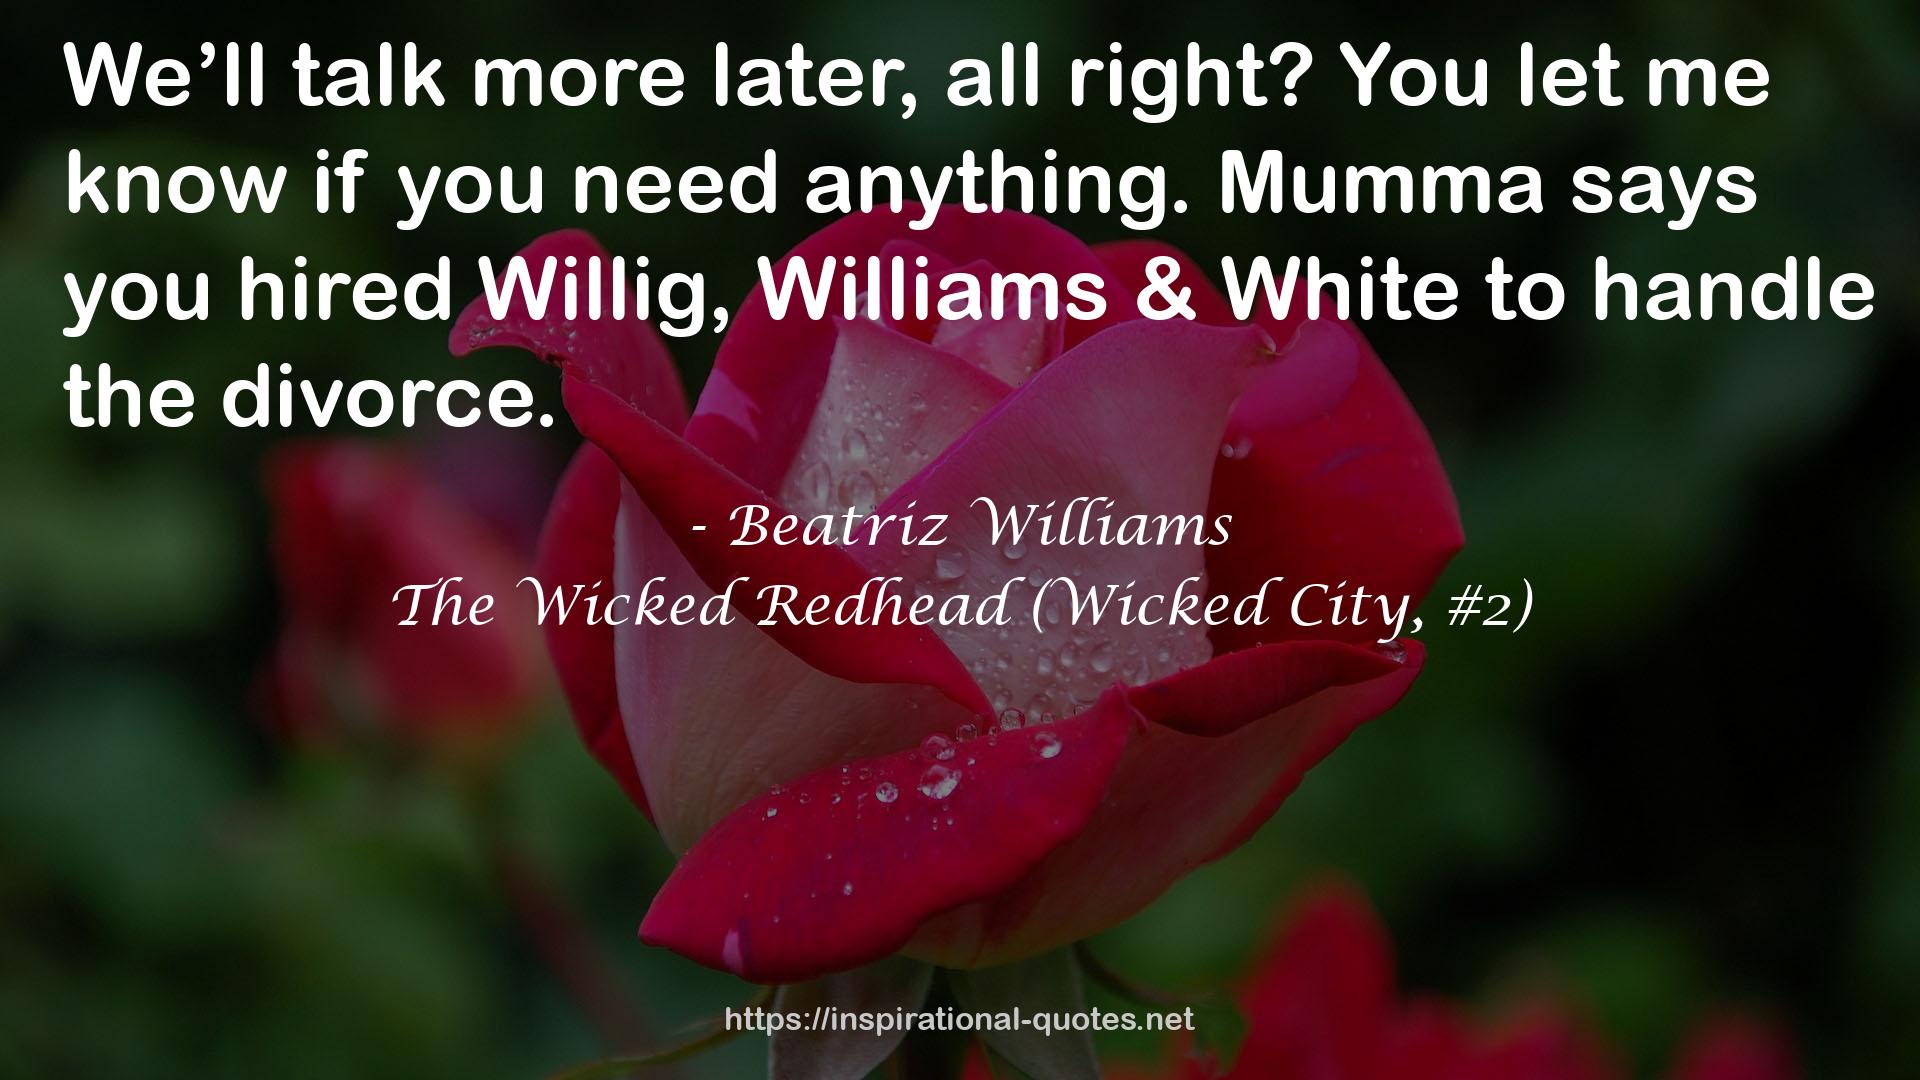 The Wicked Redhead (Wicked City, #2) QUOTES